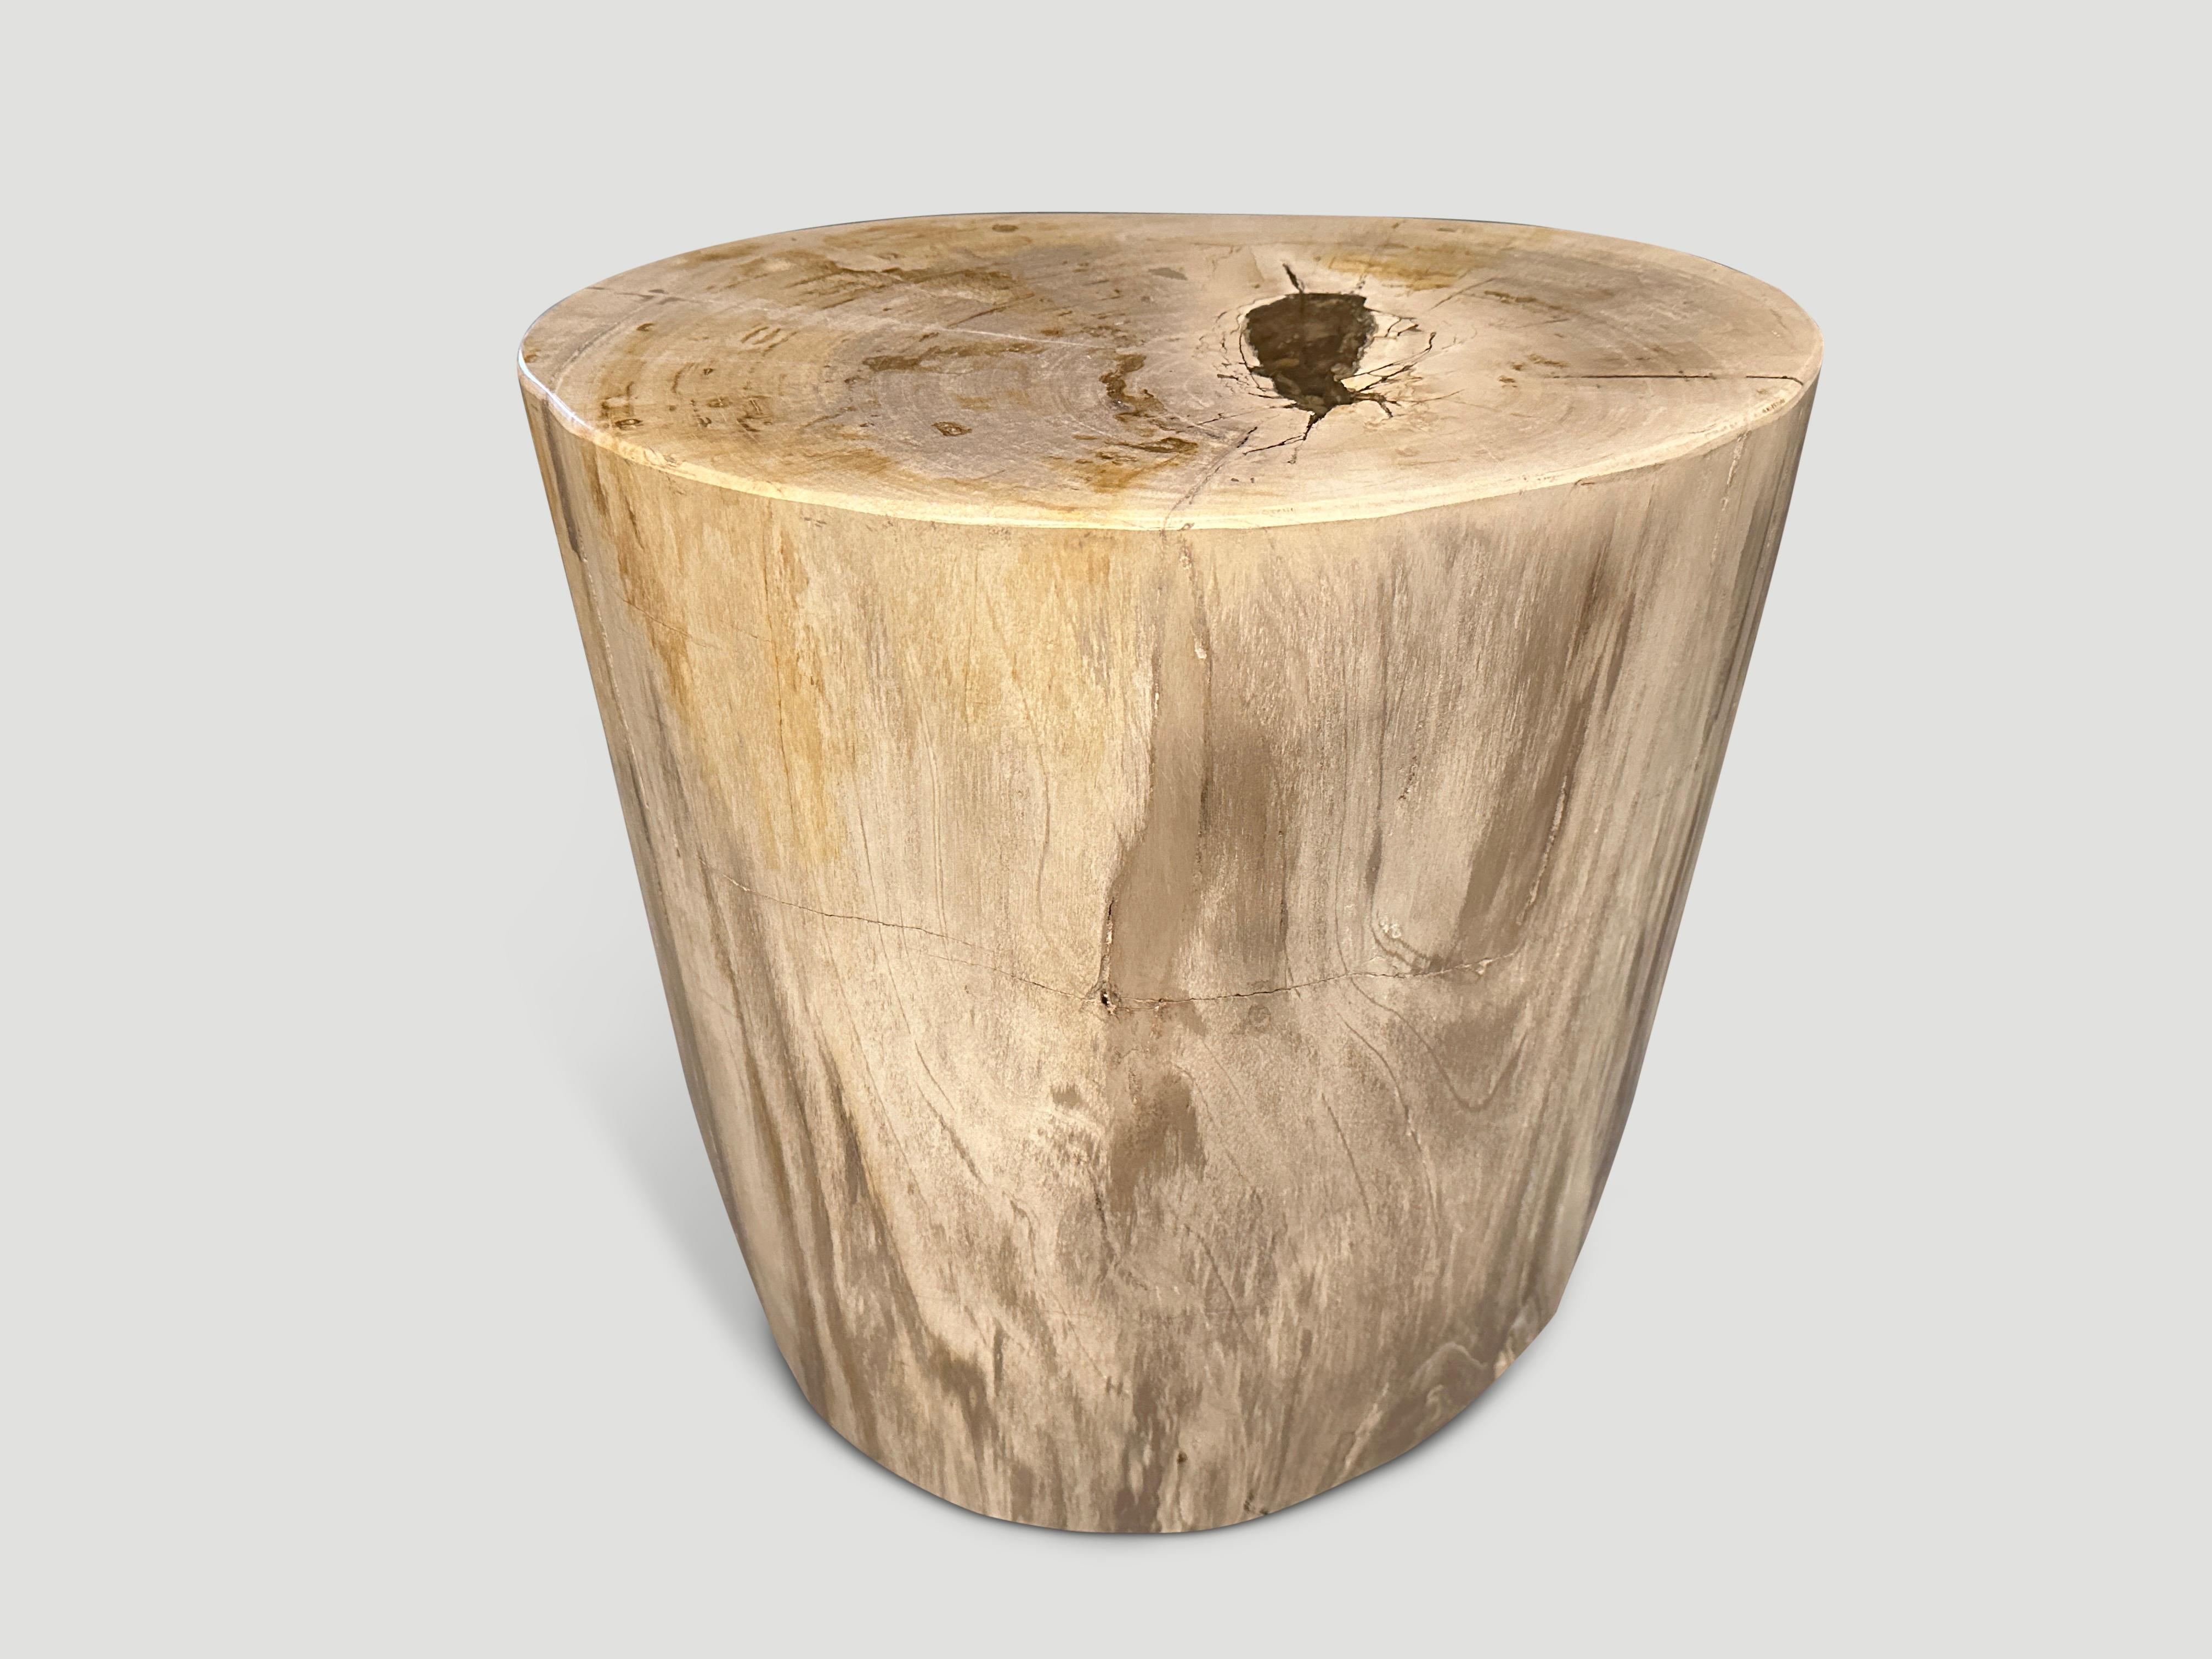 Impressive beautiful contrasting tones on this high quality petrified wood side table. It’s fascinating how Mother Nature produces these stunning 40 million year old petrified teak logs with such contrasting colors and natural patterns throughout.